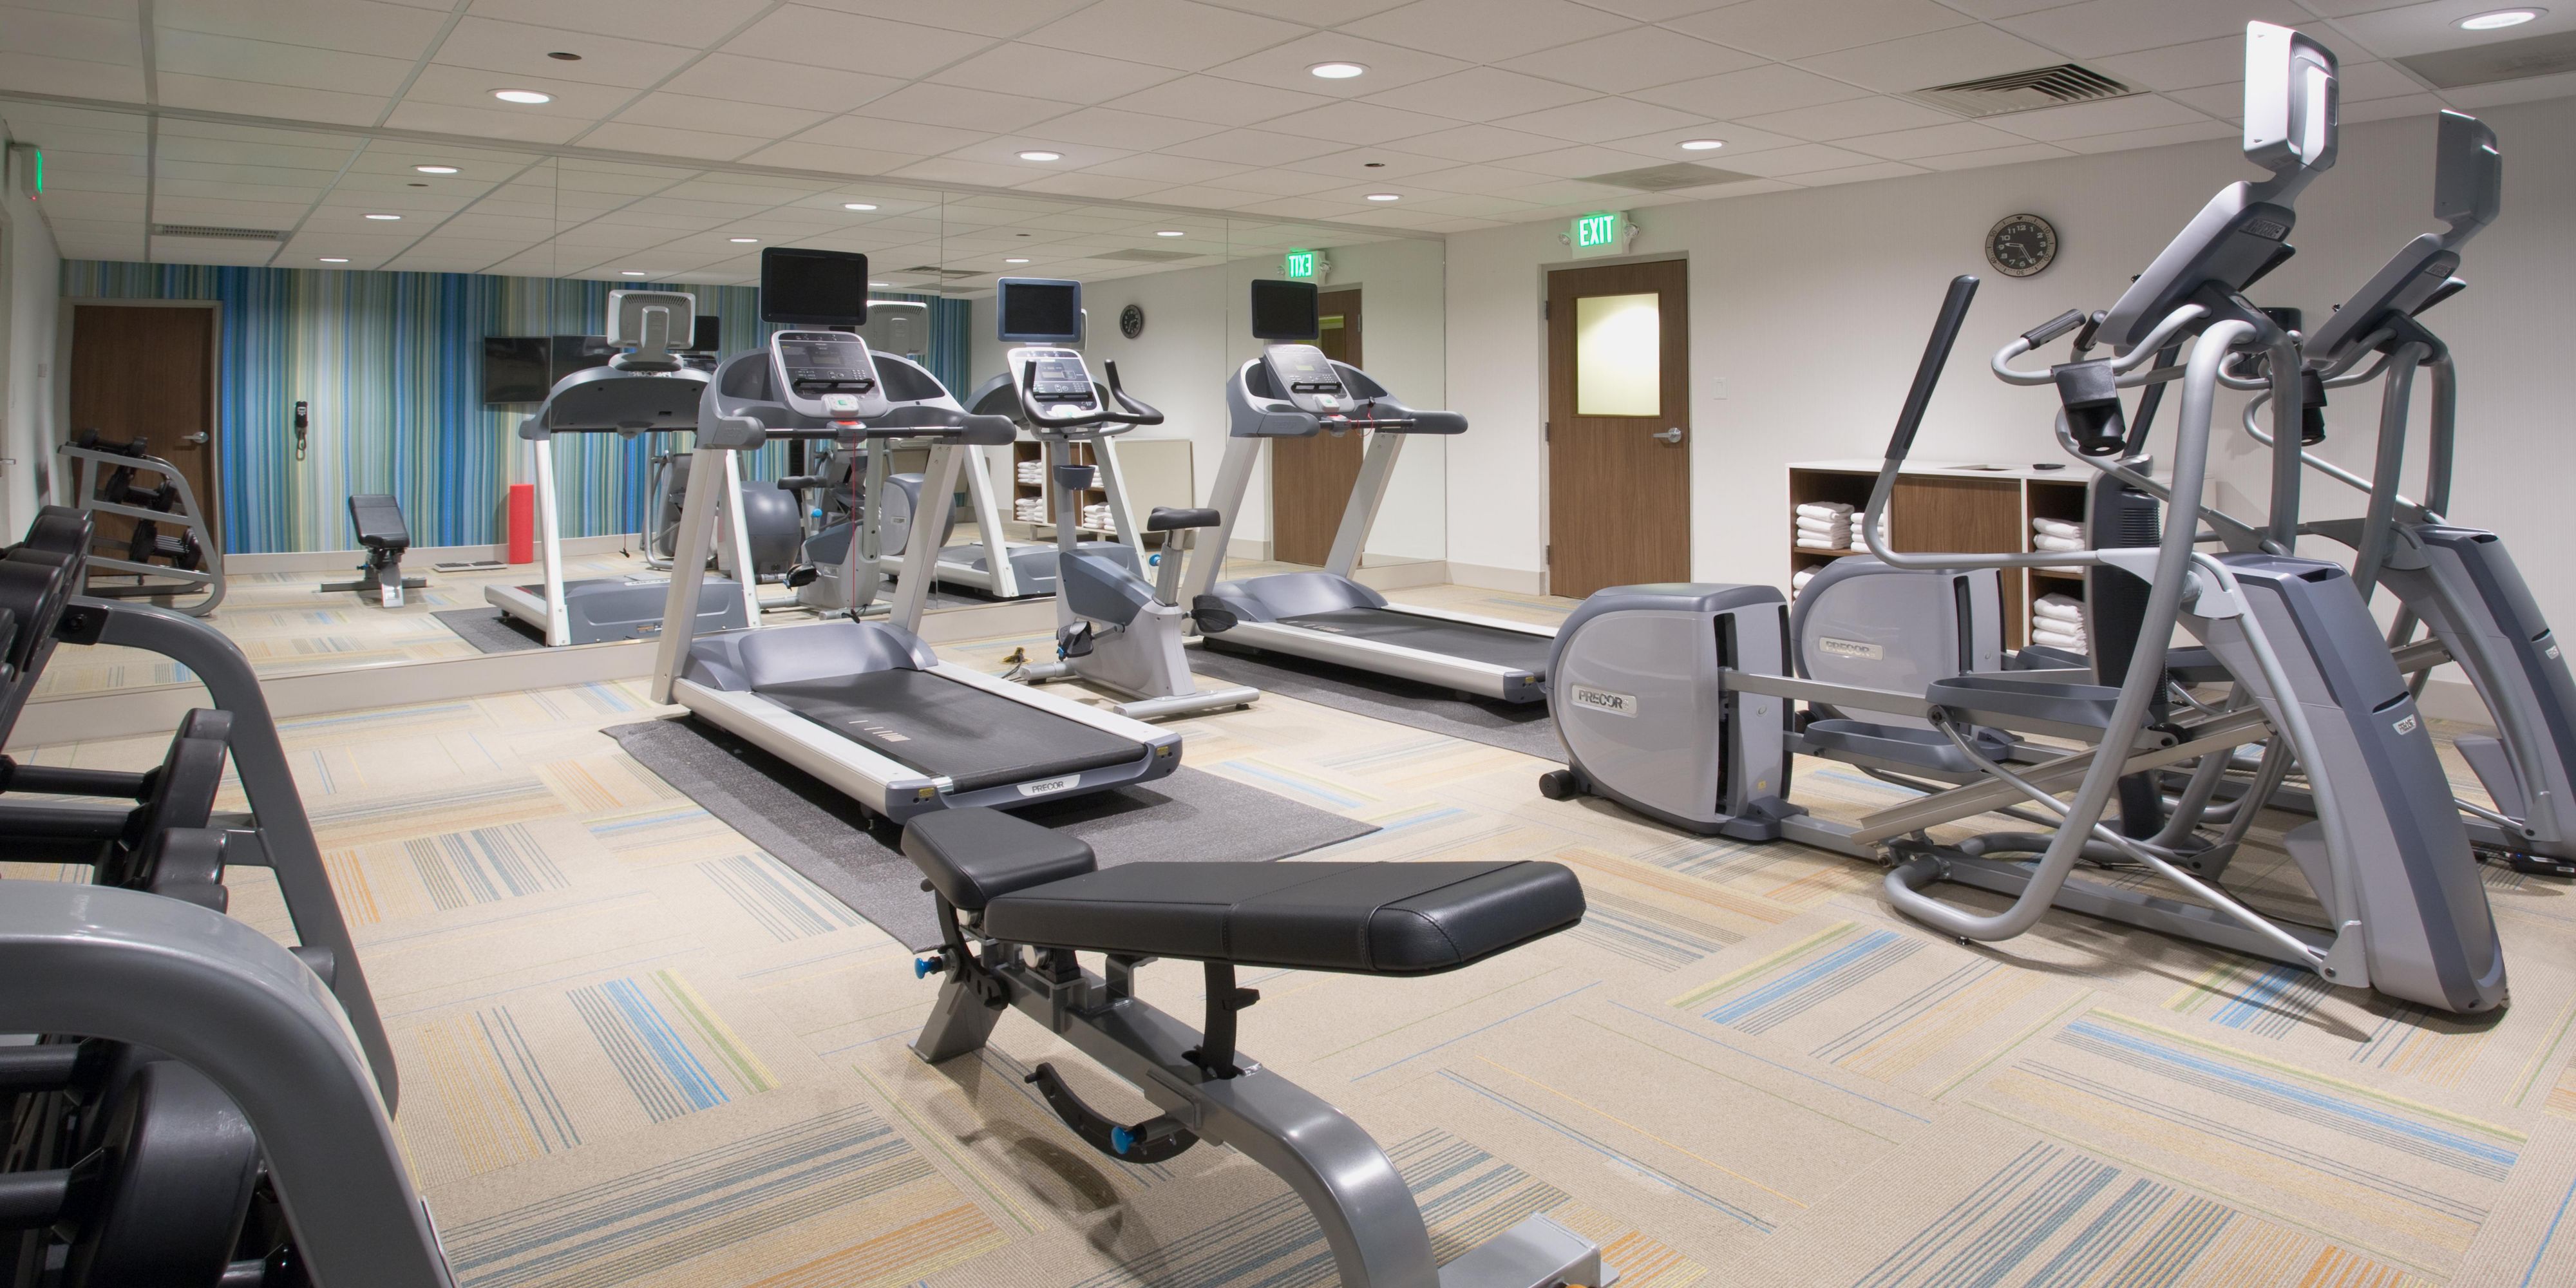 Open 24 hours. Equipment includes treadmill, elliptical, exercise bike, free weights with weight bench.  Stay cool in the air-condition and watch TV for Sports and News updates while working out.